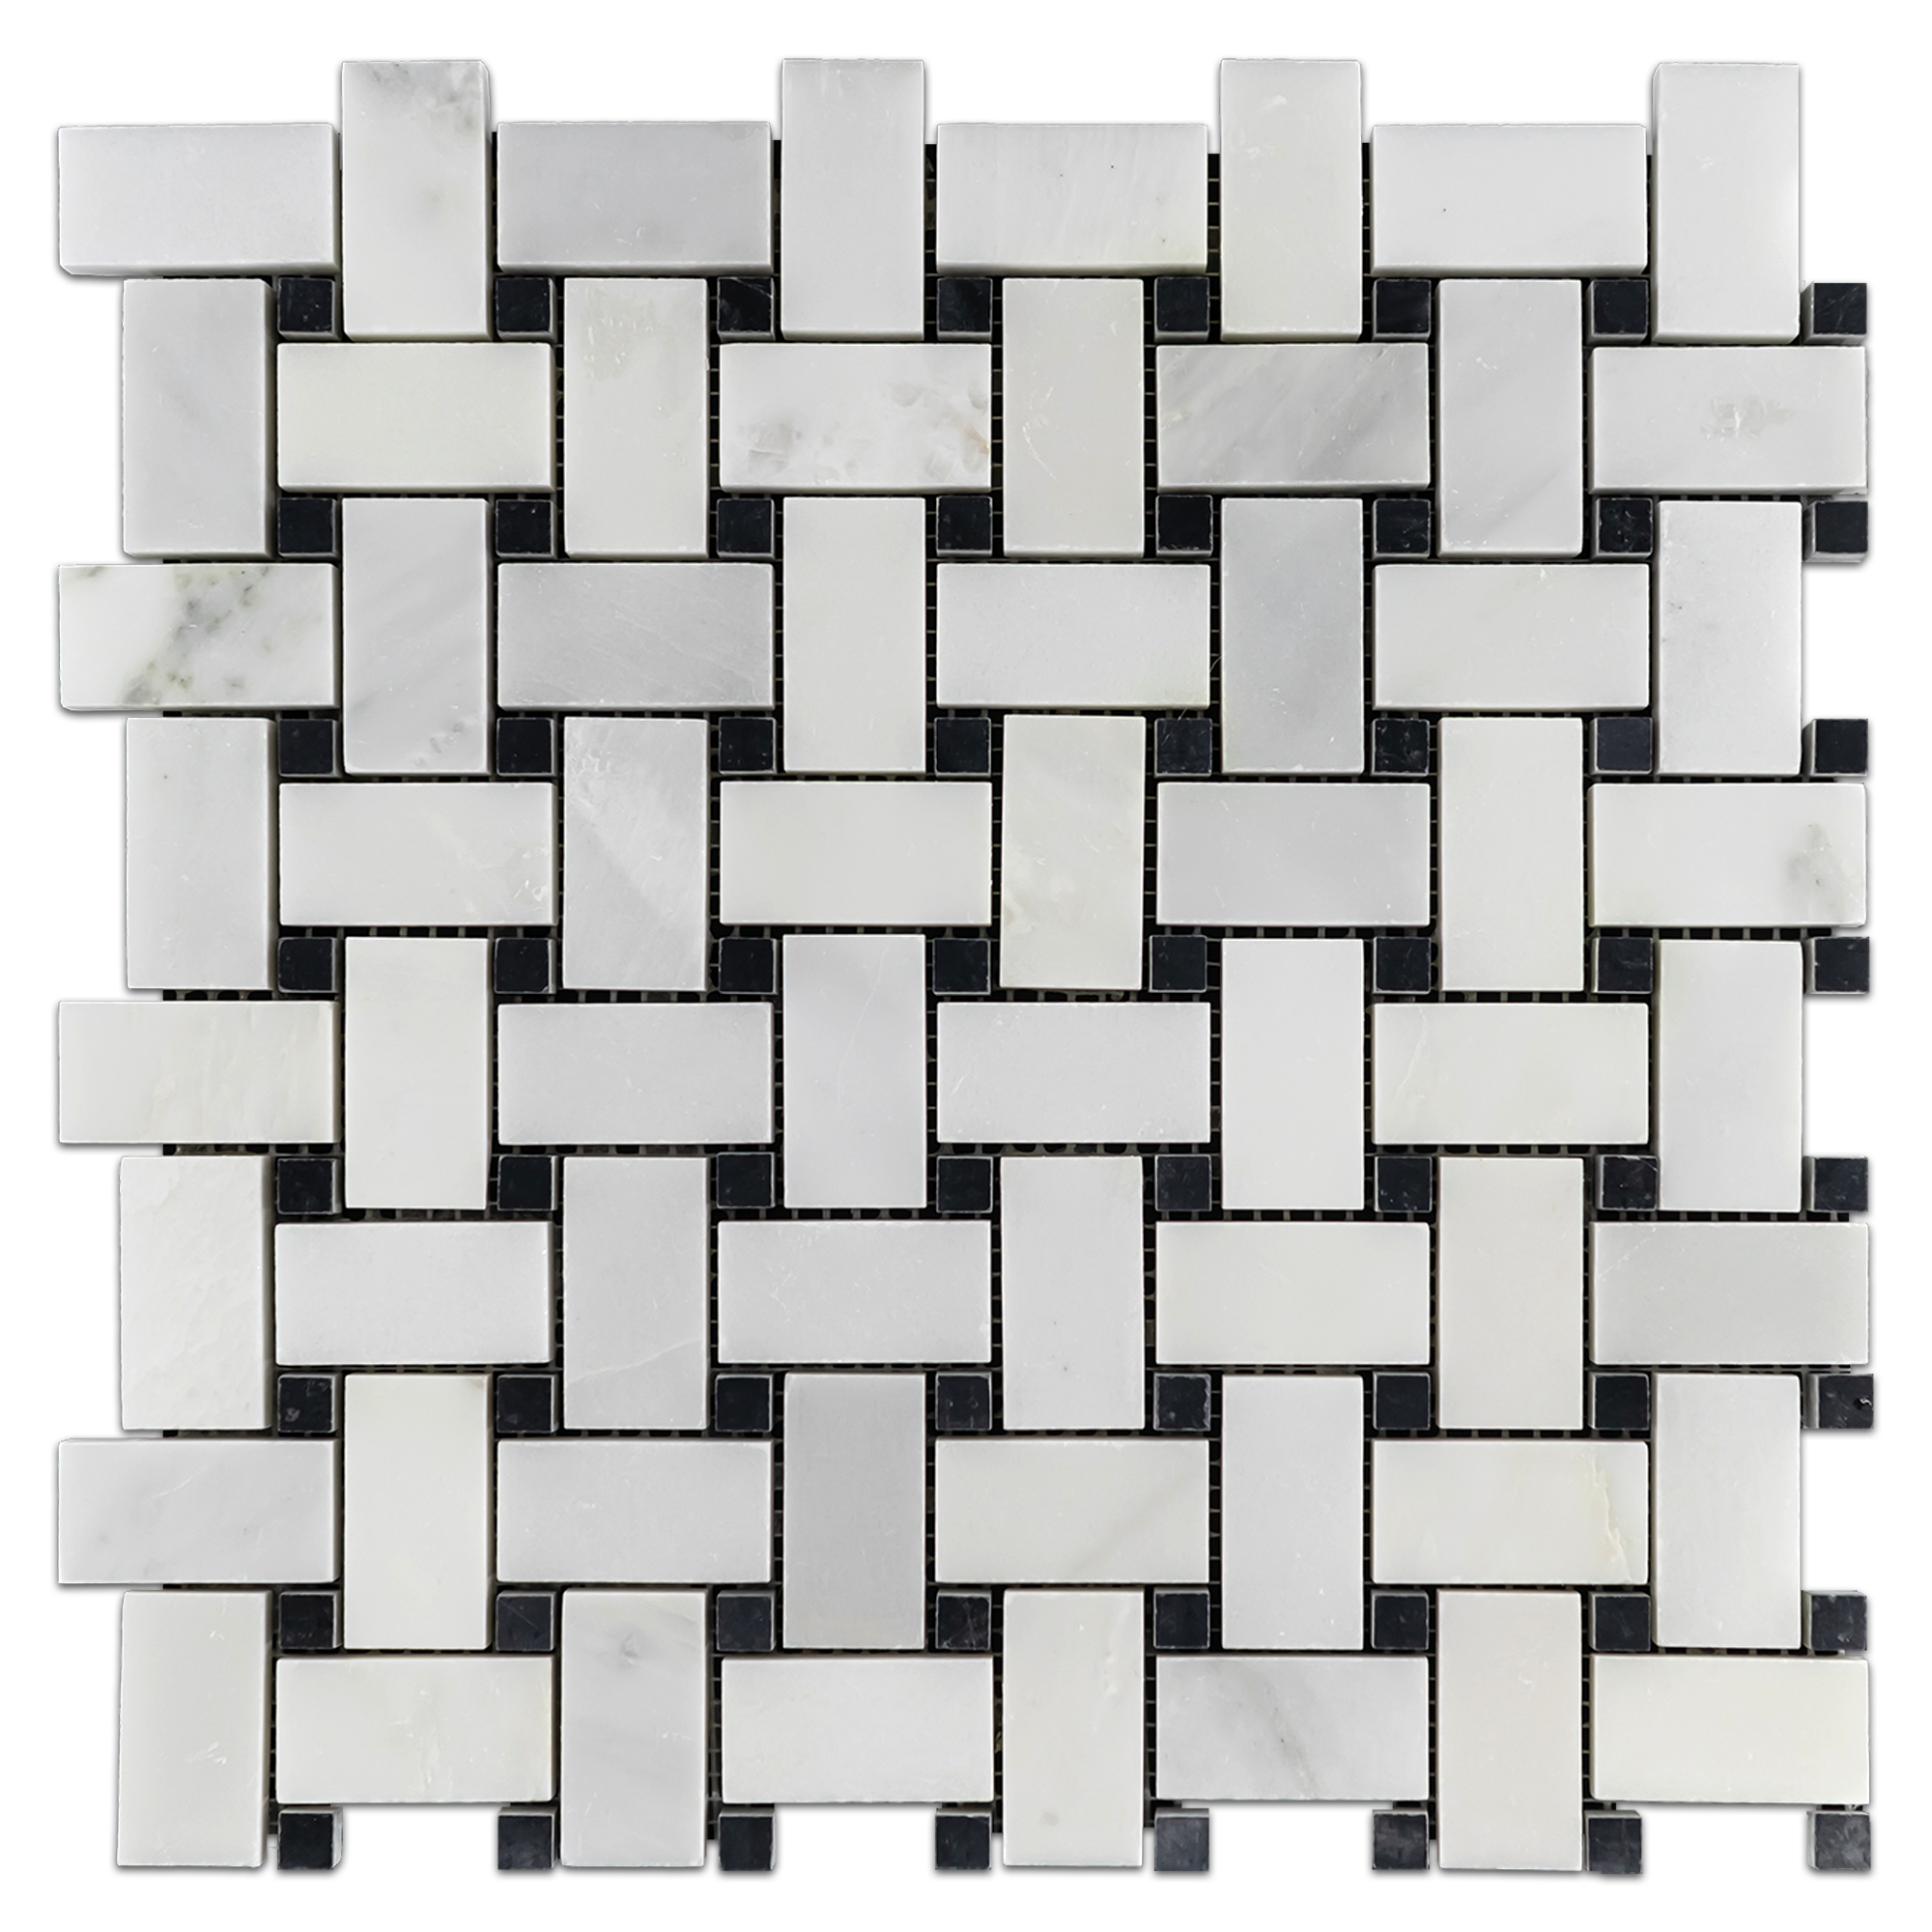 Elon Pearl White Black Marble Stone Blend Basketweave Field Mosaic 12x12x0.375 Honed AM1106H Surface Group International Product